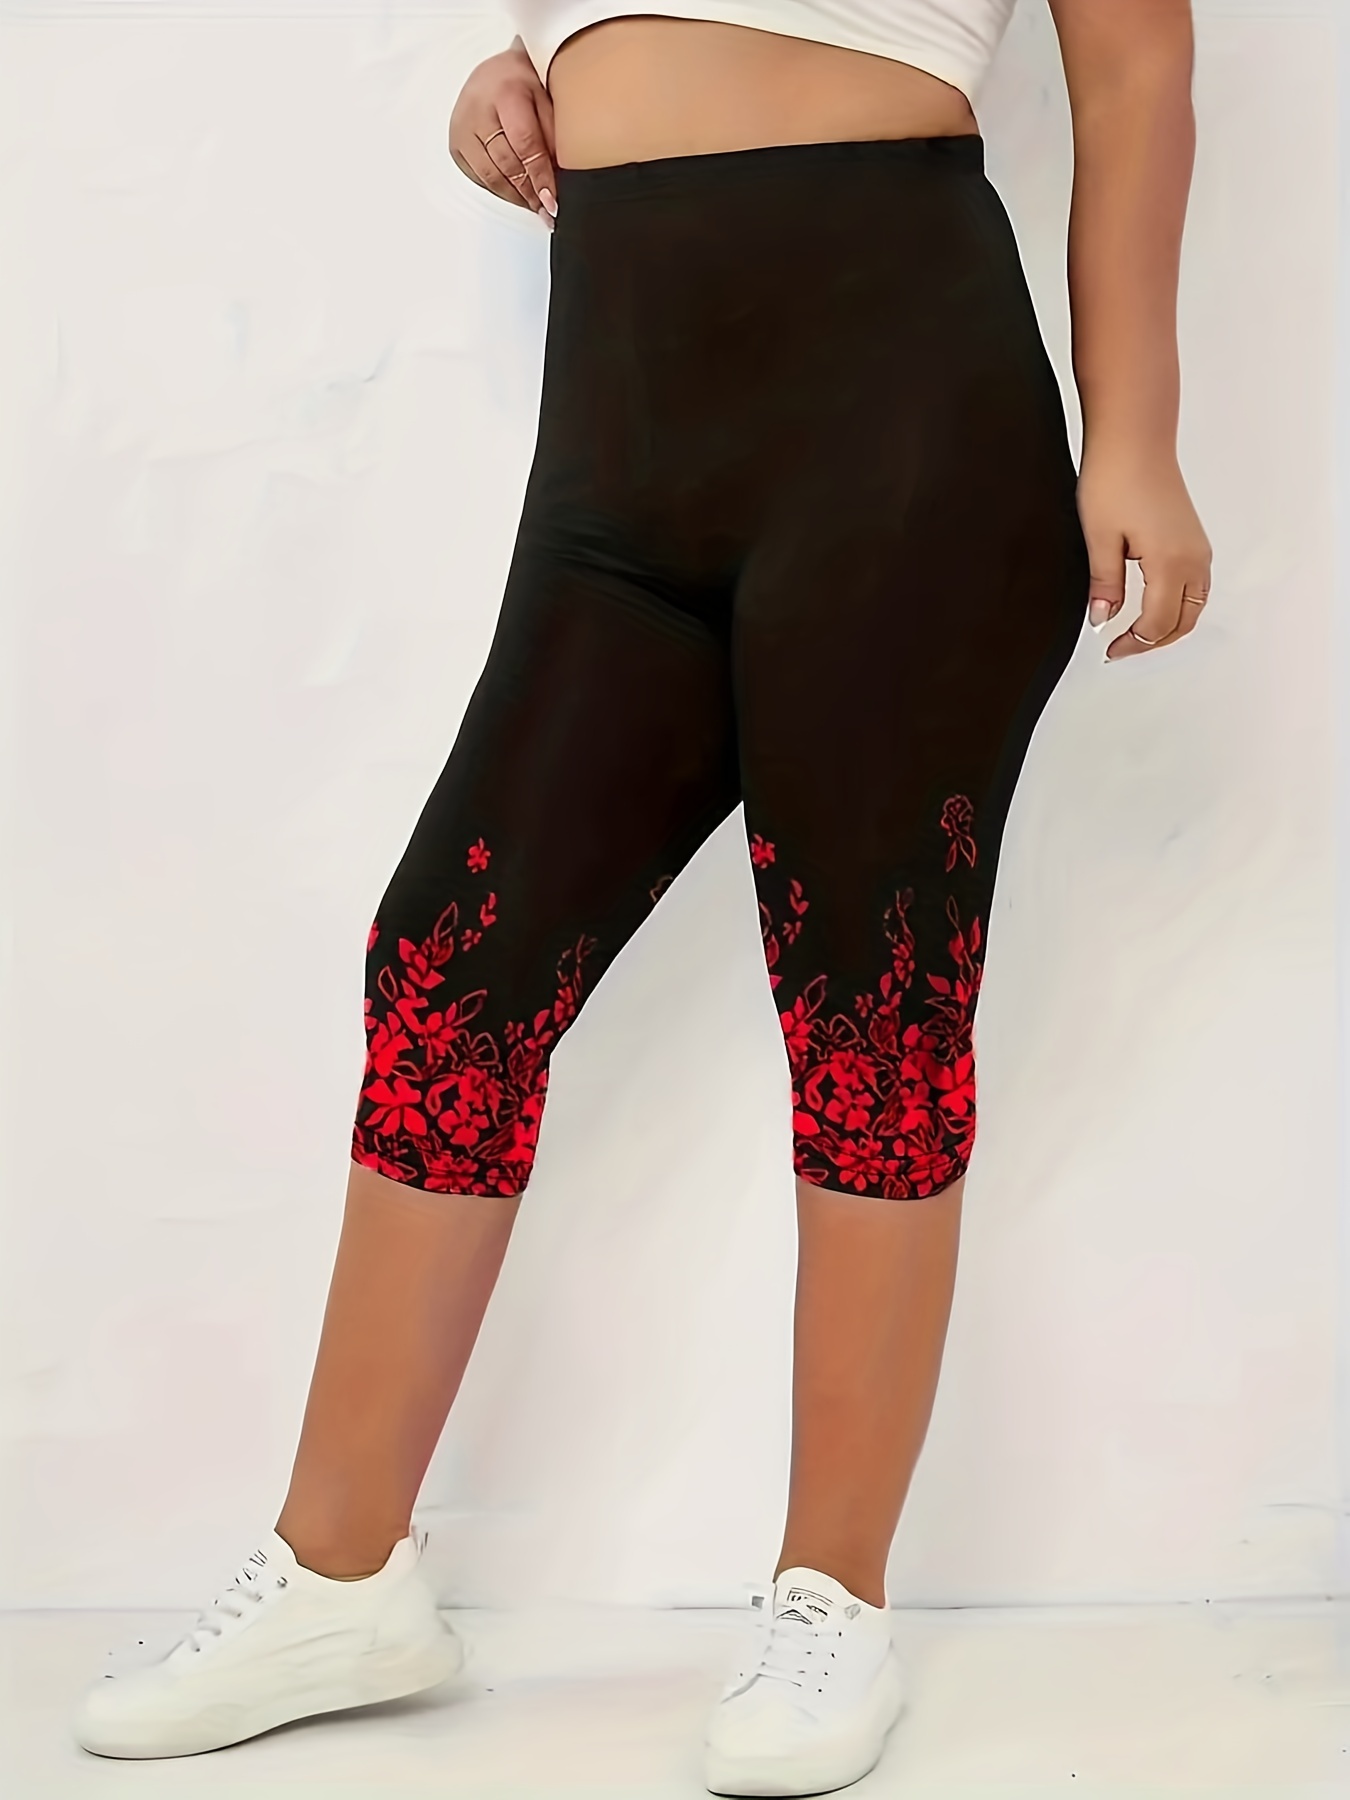 First Looks 145617 Womens Floral Seamless Leggings Black/Red Size Medium/ Large